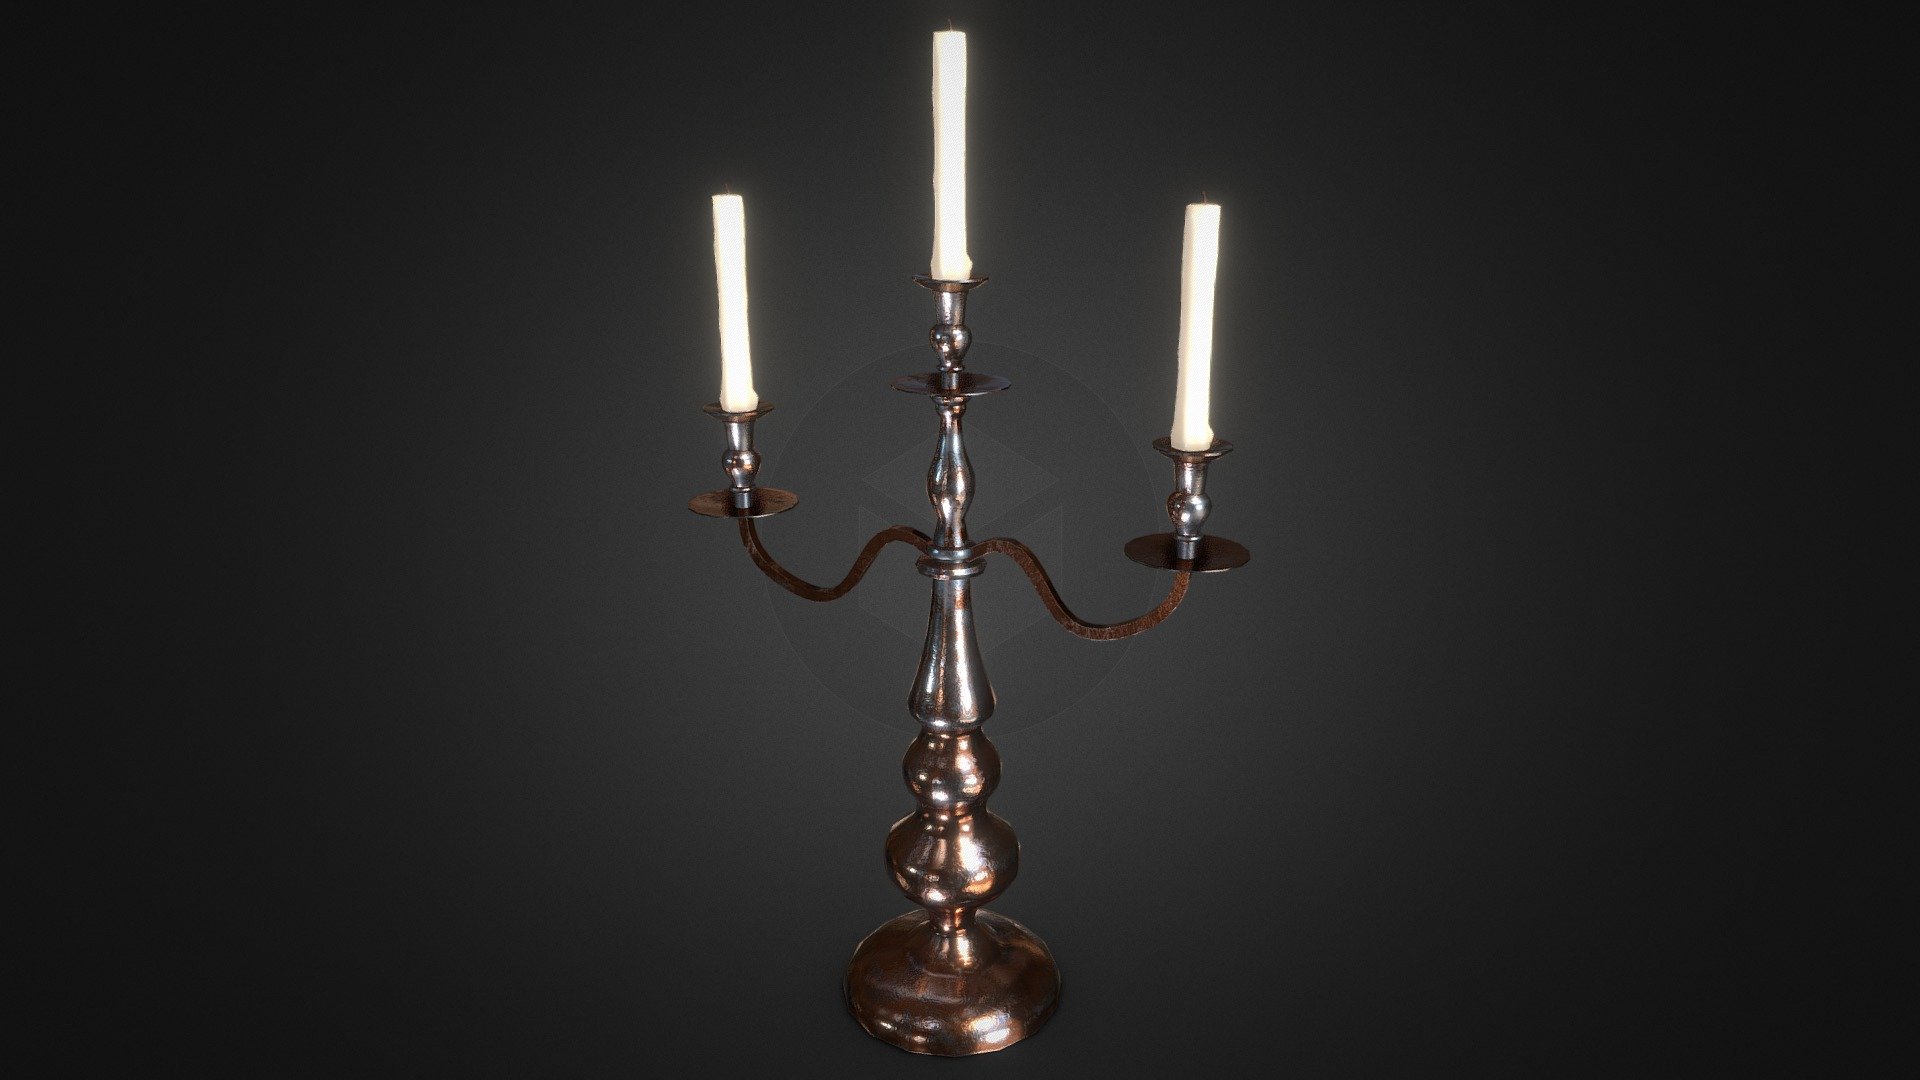 This is a 3D chandelier made for dining tables or bureaus for illumination in old environments - Table Chandelier 3D Model - 3D model by IPfuentes 3d model